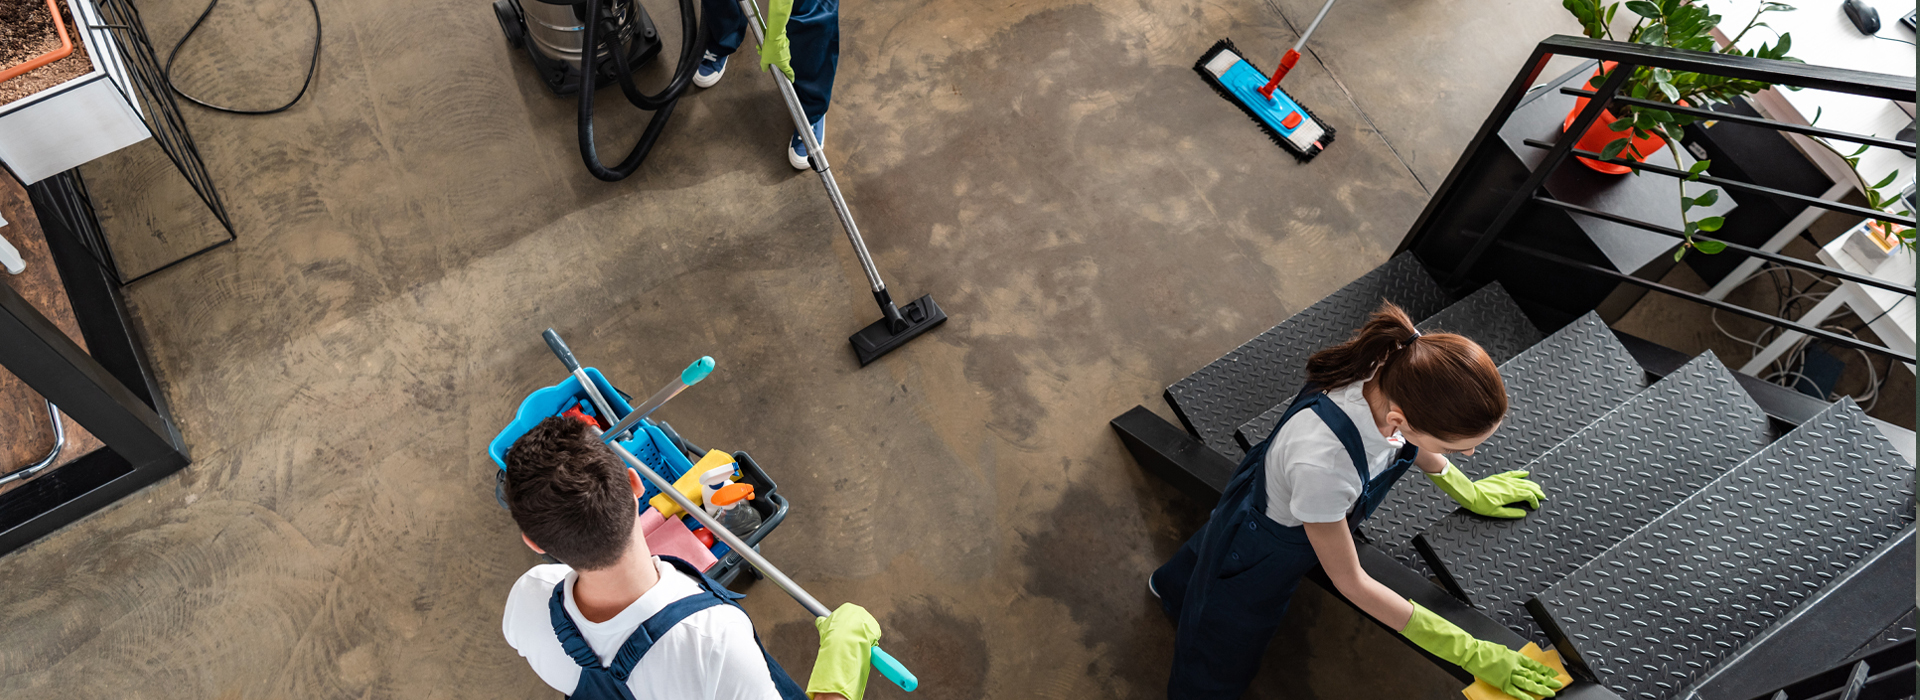 Questions to ask when hiring a Janitorial Cleaning Company